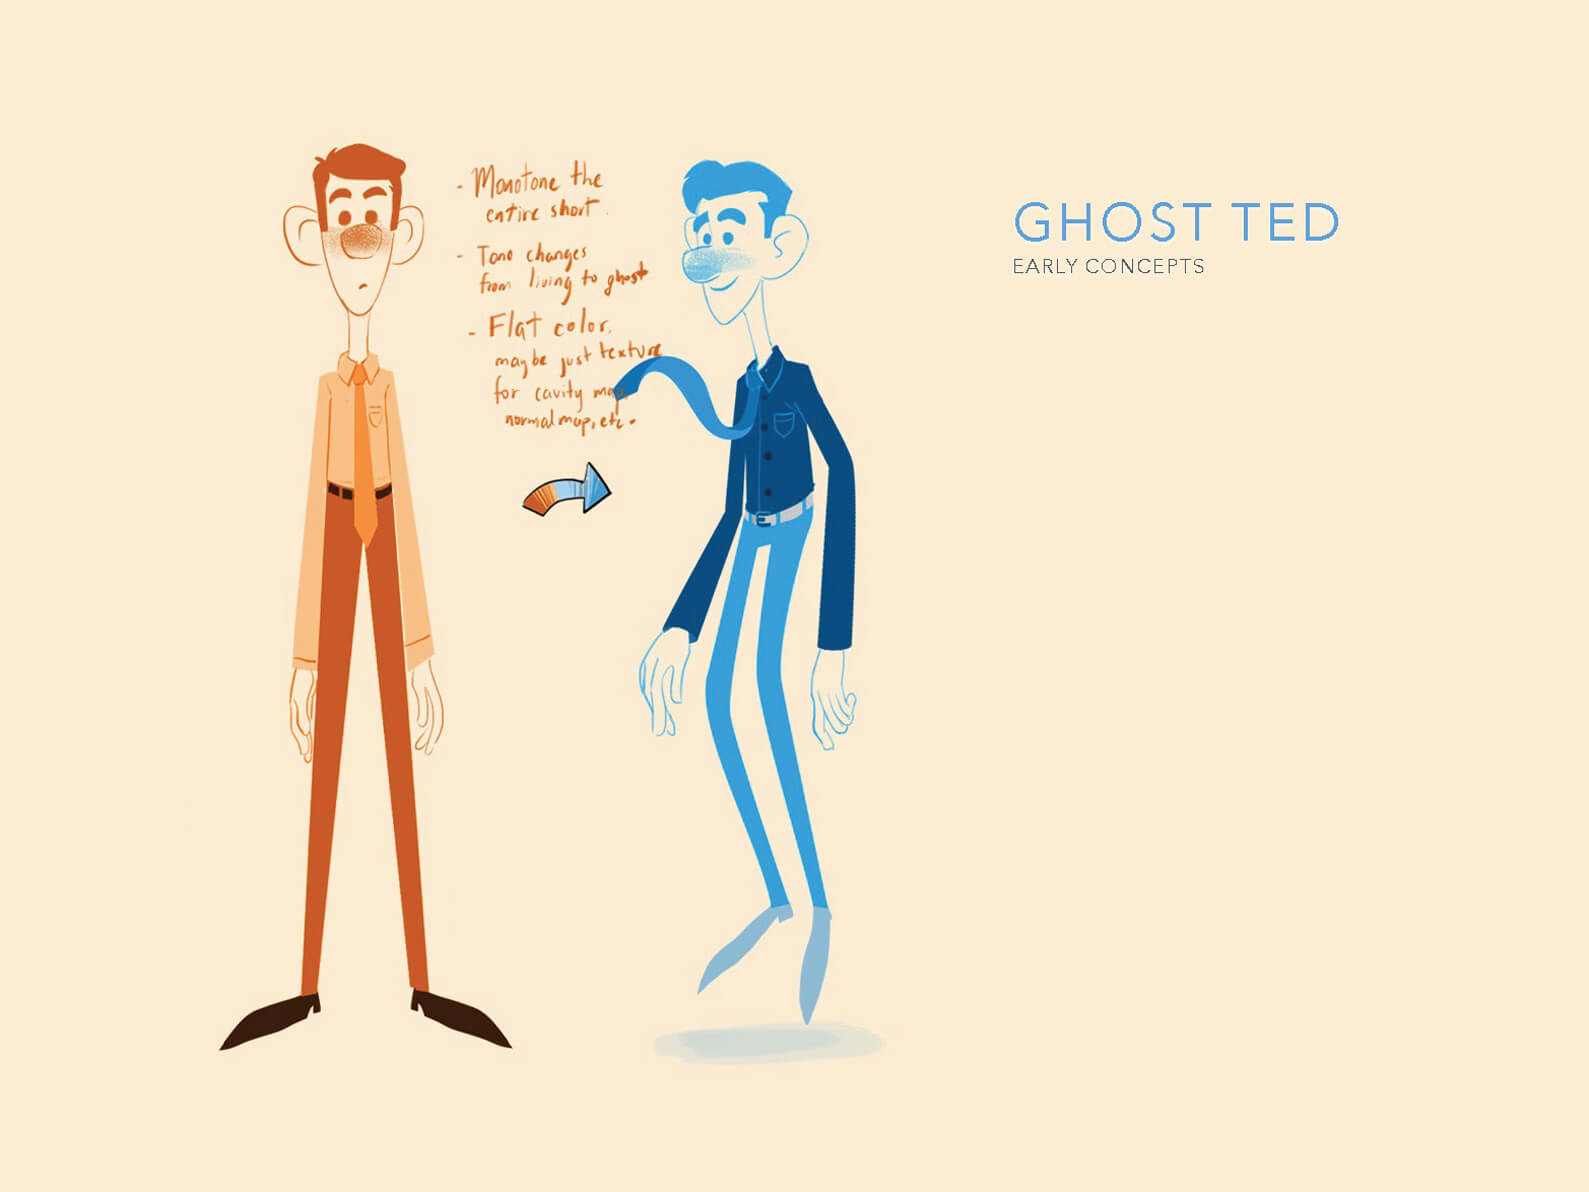 Early concept sketch of Ted's change from alive color palette to ghostly blue once dead in Orientation Center for the Unseen